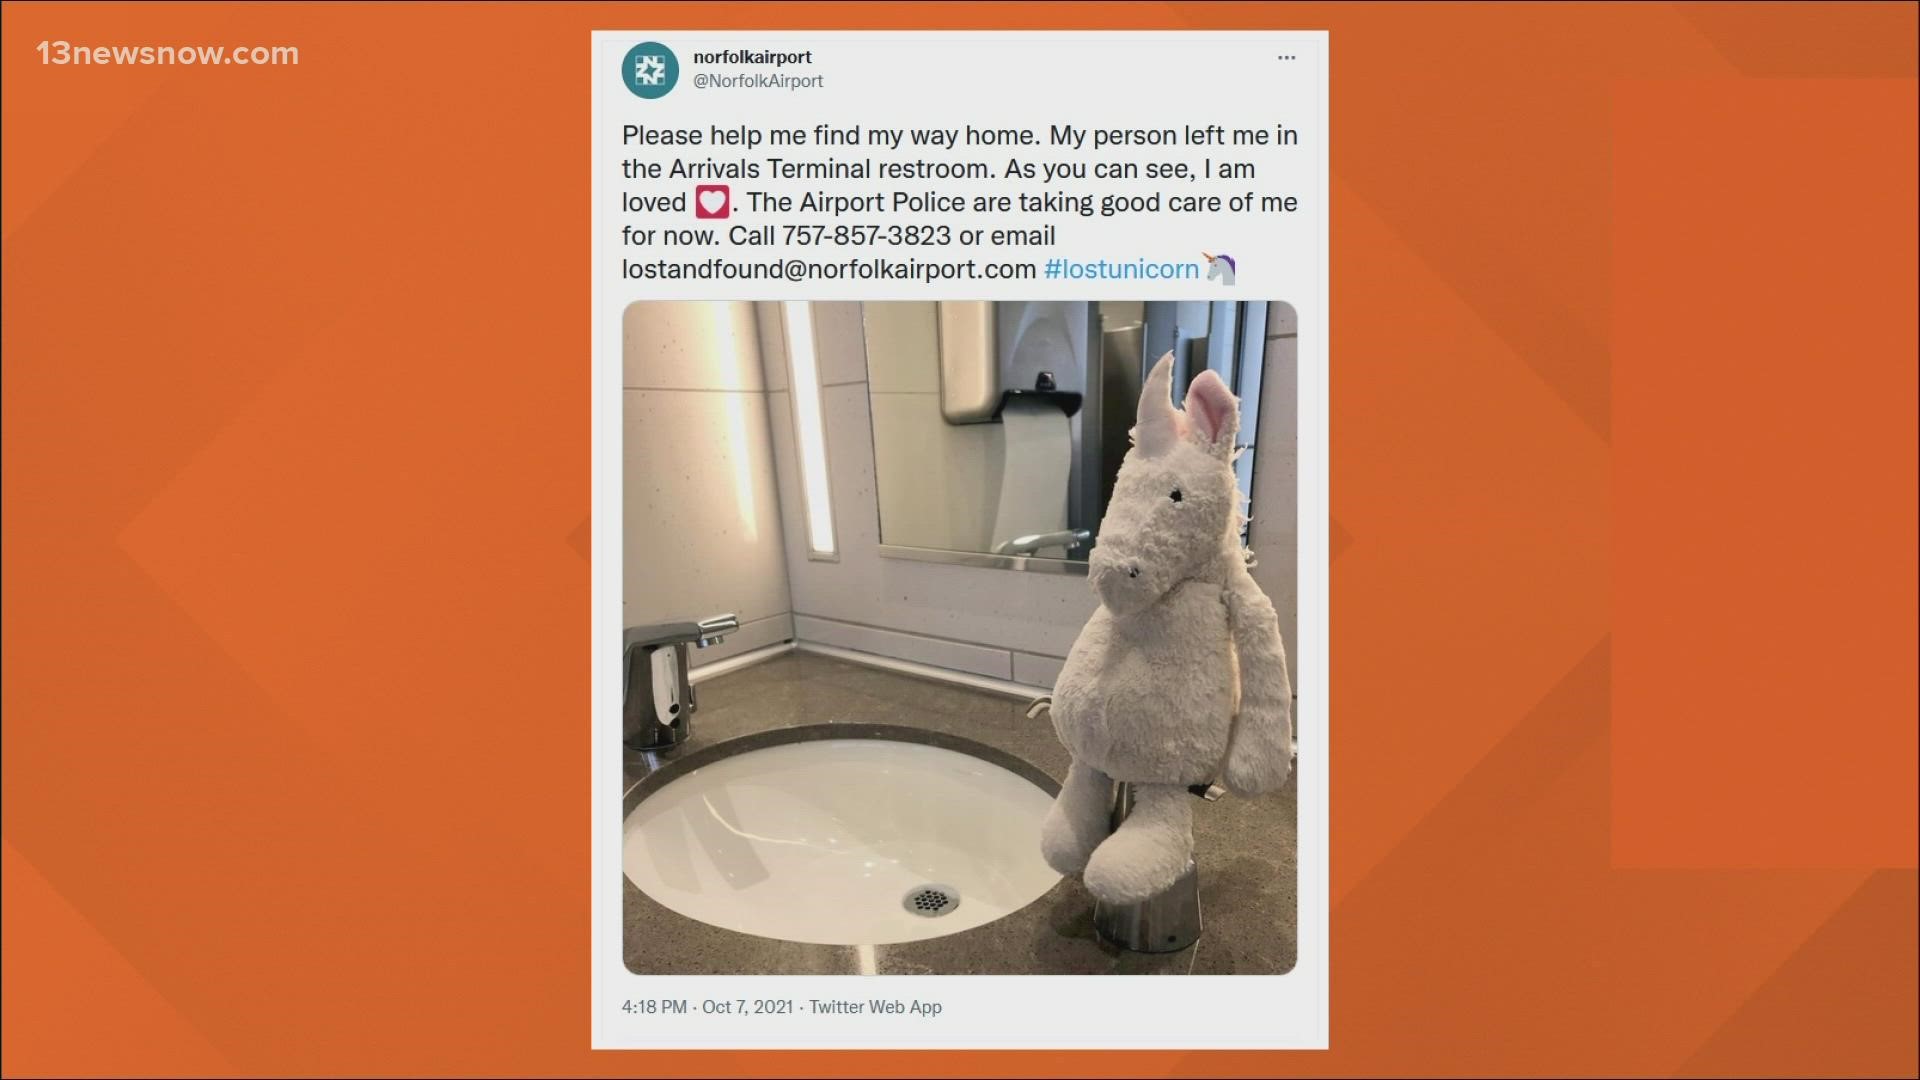 On Thursday afternoon, the airport shared a photo of a stuffed unicorn that was found sitting by a restroom sink at the arrivals terminal.